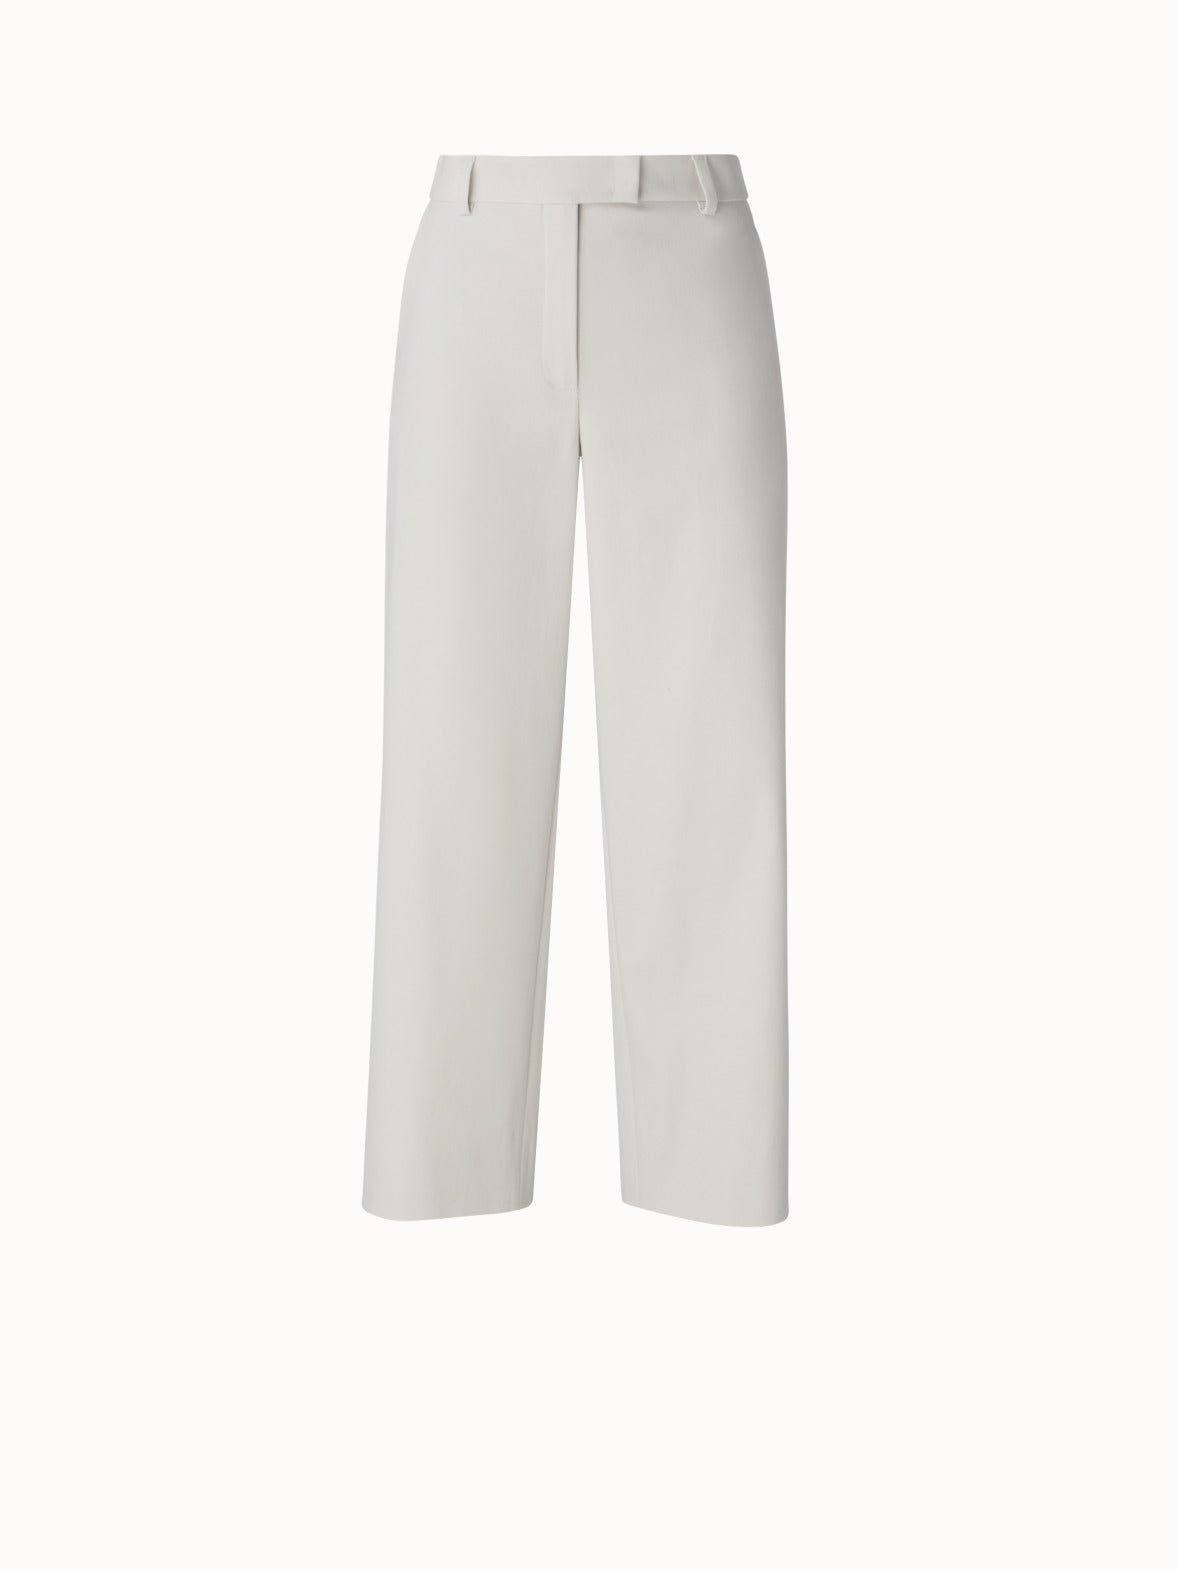 Buy Mango Cord Culotte Cropped Trousers from the Laura Ashley online shop